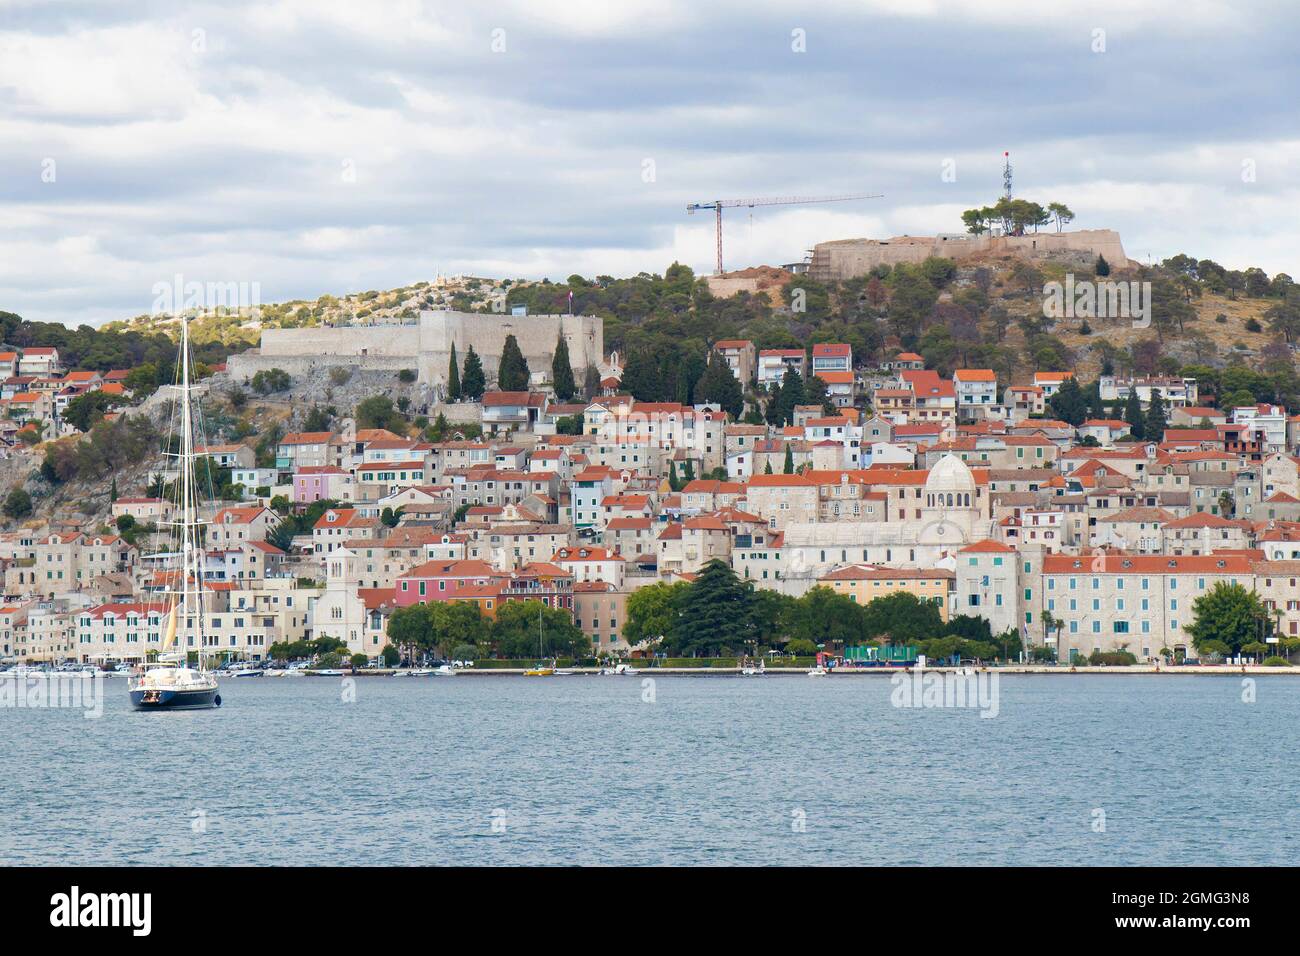 Sibenik, Croatia - August 25, 2021: Old own with harbor, promenade, stone houses, cathedral and fortress viewed from the sea when arriving by ship Stock Photo